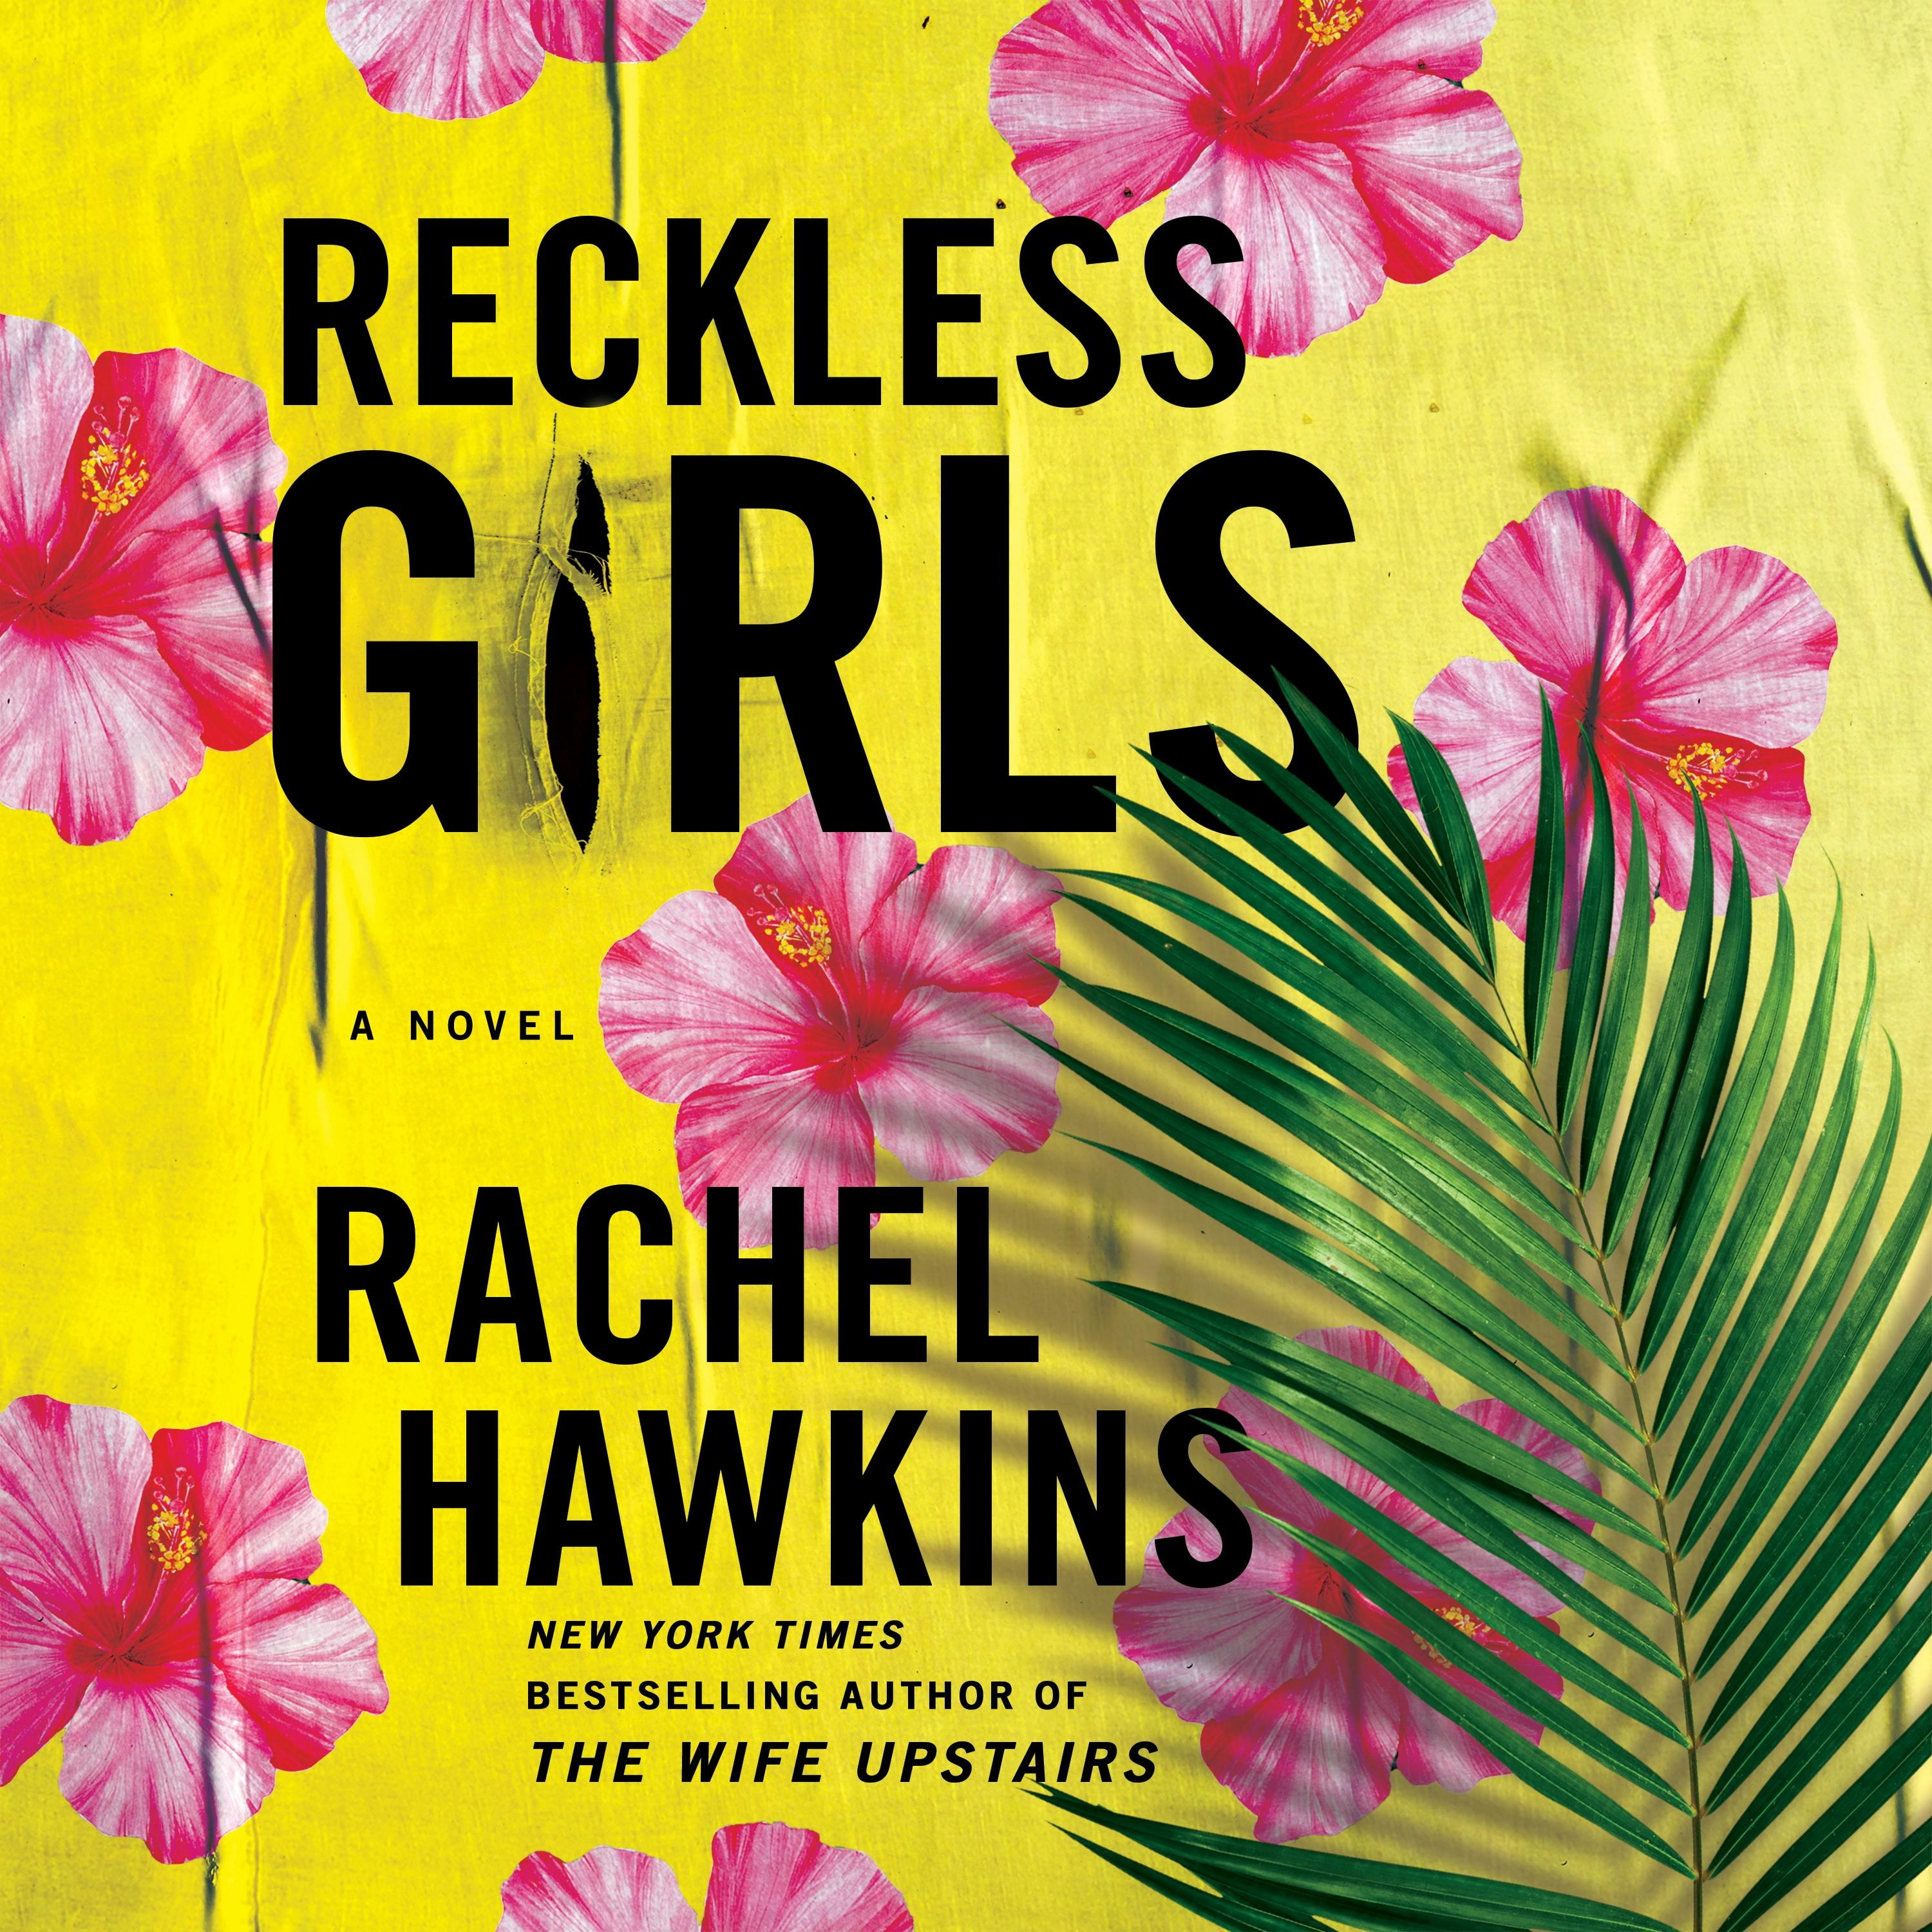 Reckless Girls image photo